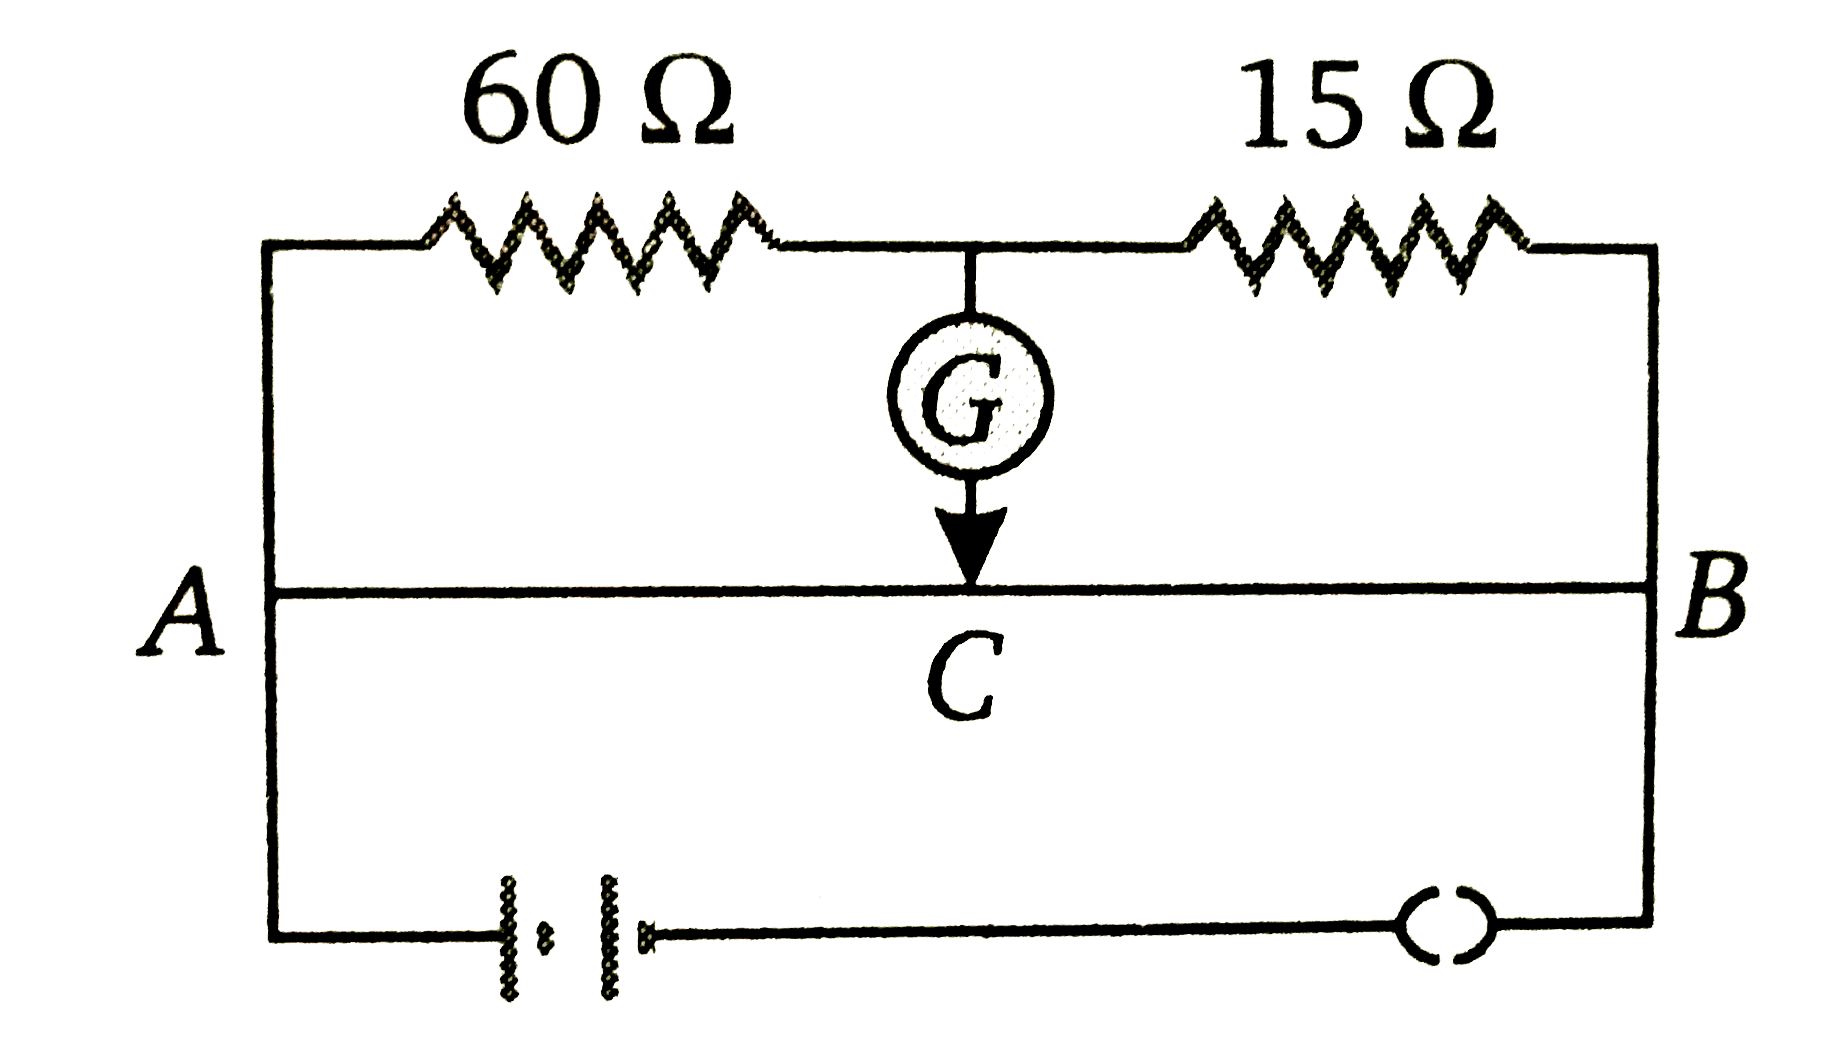 If there is no deflection in the galvanometer connected in a circuit shown in figure, then the ratio of lengths AC/CB is